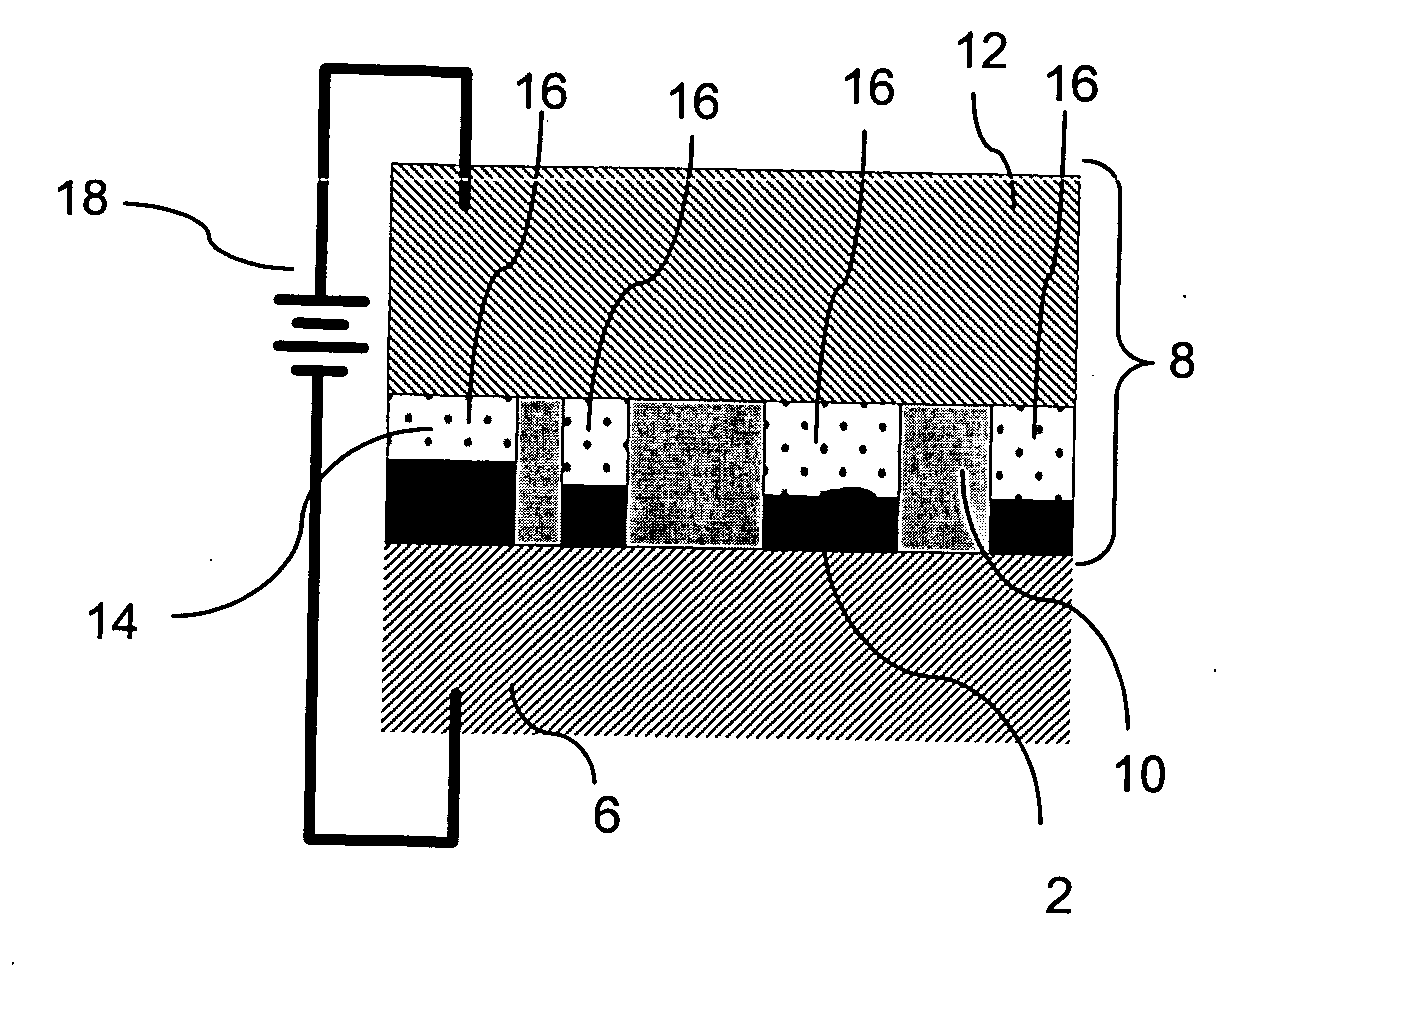 Electrochemical fabrication method for fabricating space transformers or co-fabricating probes and space transformers